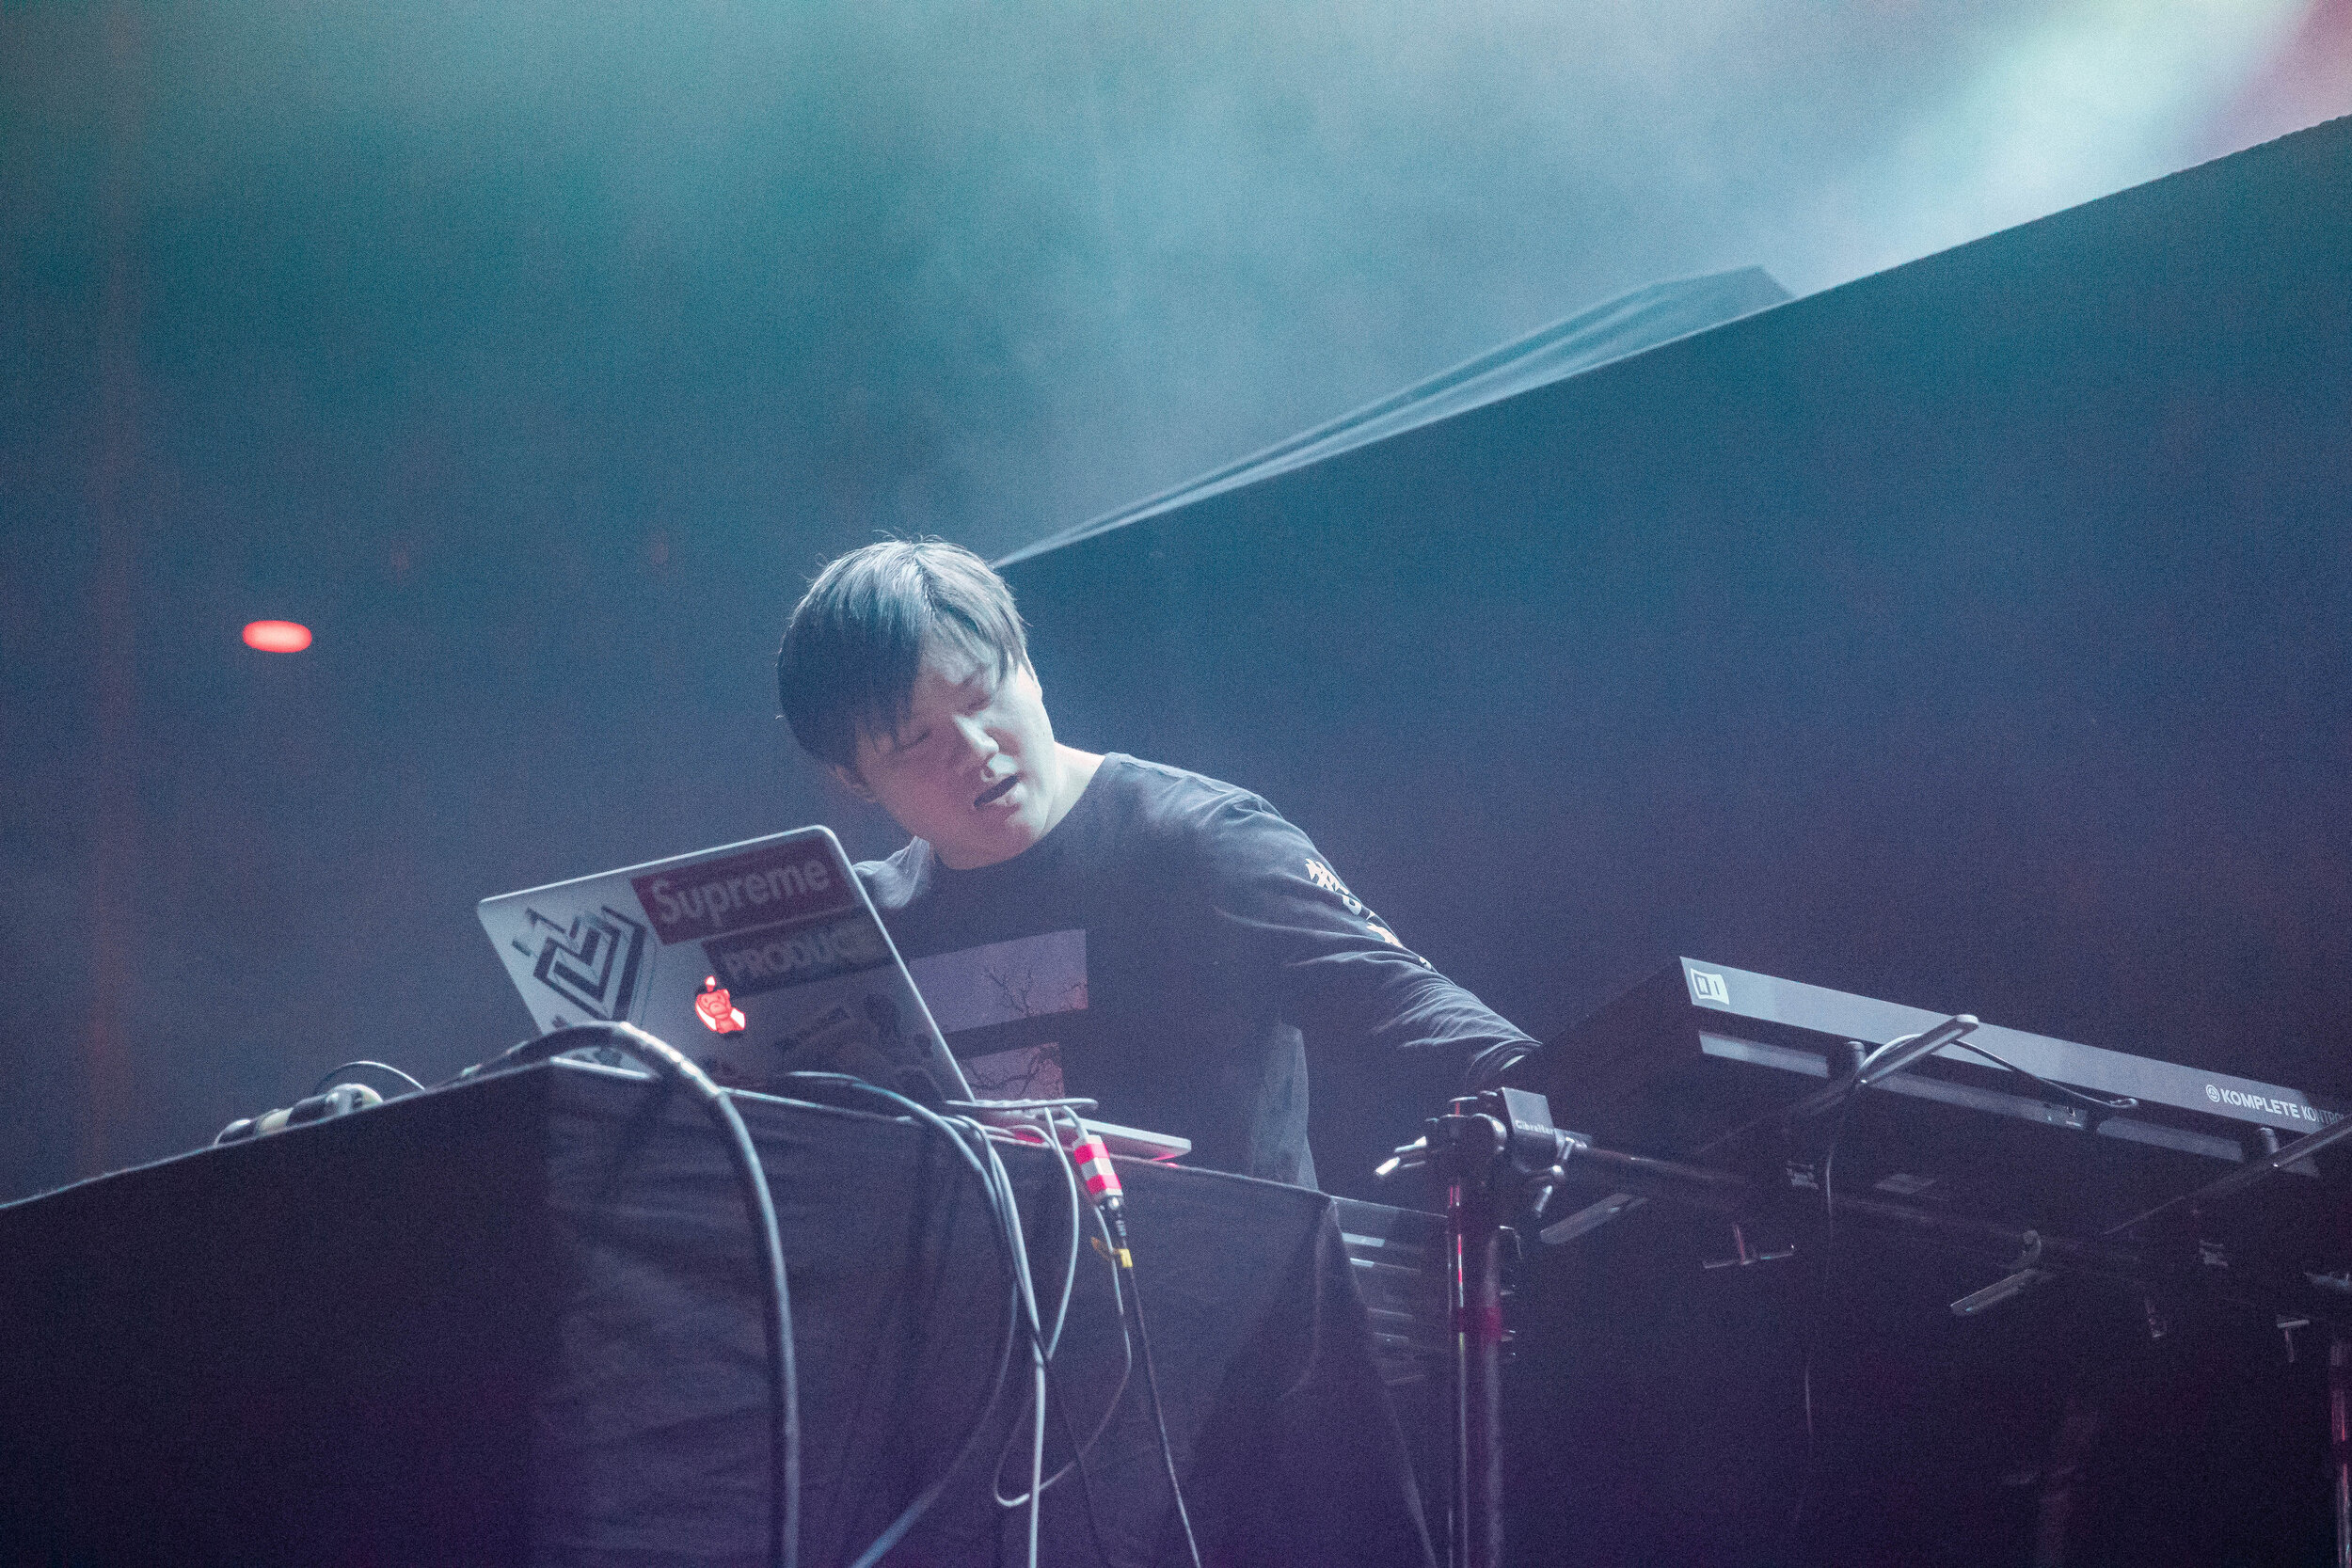    Dabin     // 2019-11-08 //   Credit Union 1 Arena at UIC    -  Chicago, IL // Photos by  Astrid Elstrom  